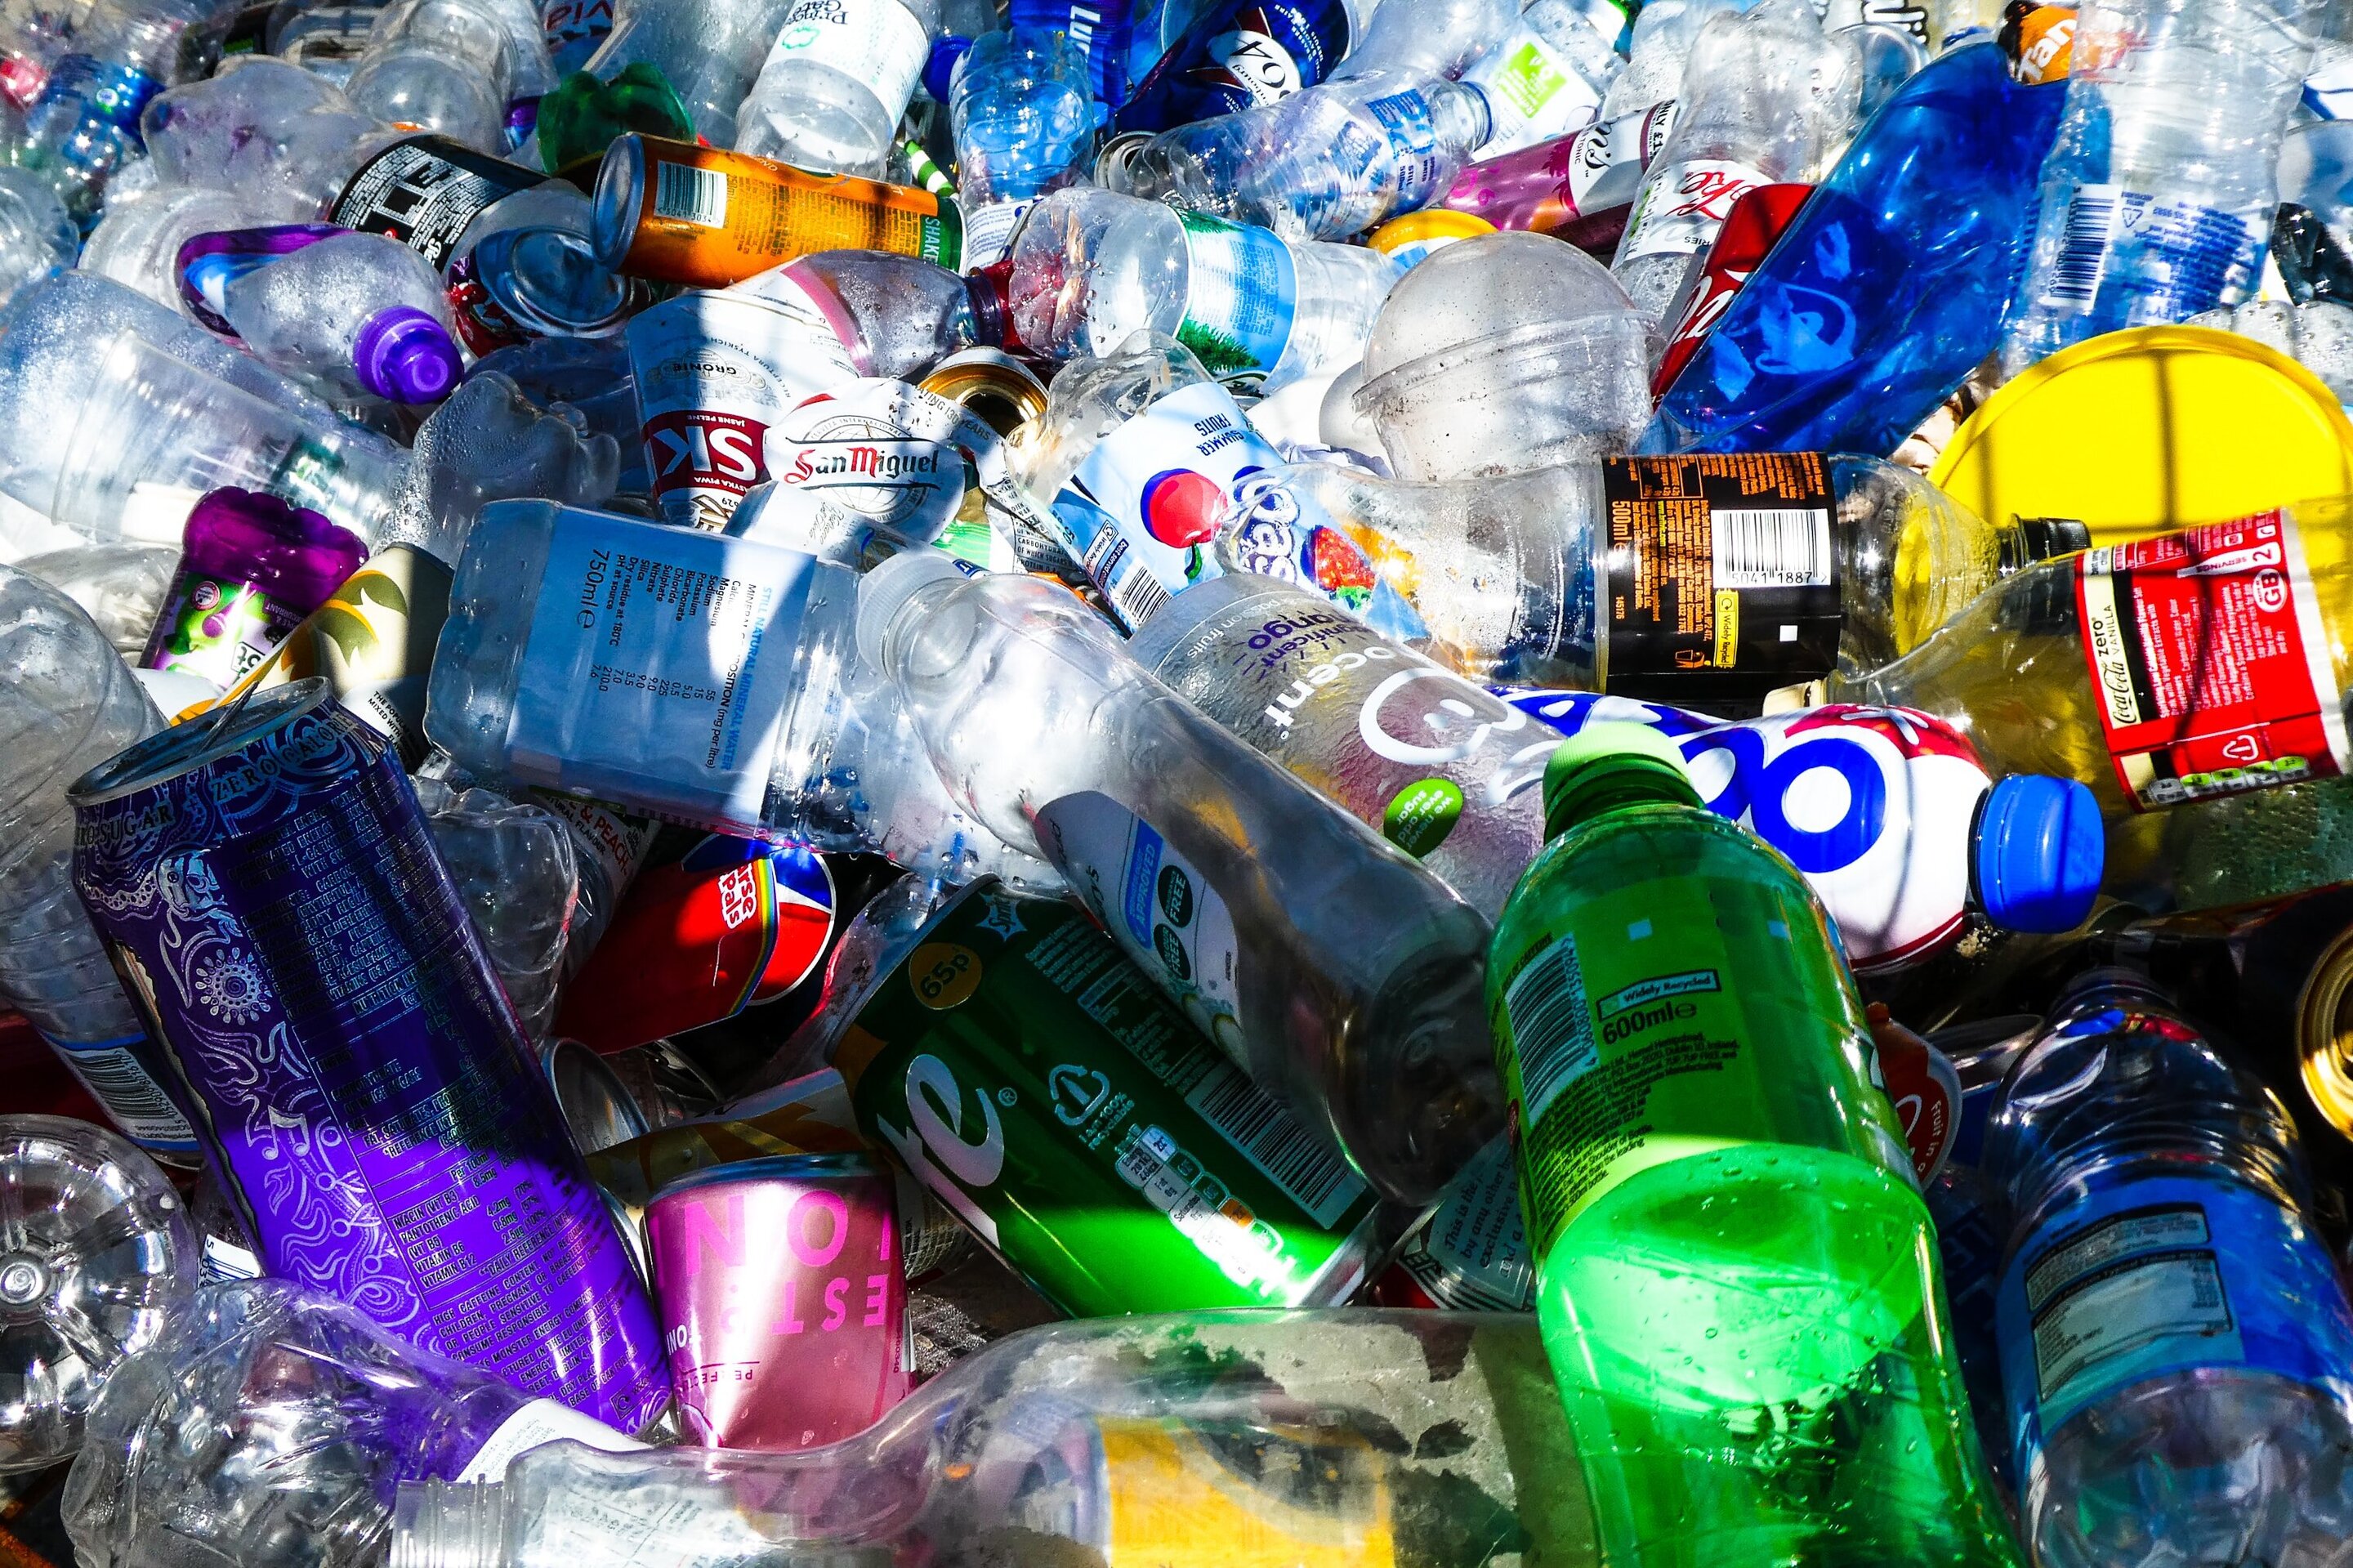 Plastic-eating enzyme could eliminate billions of tons of landfill waste